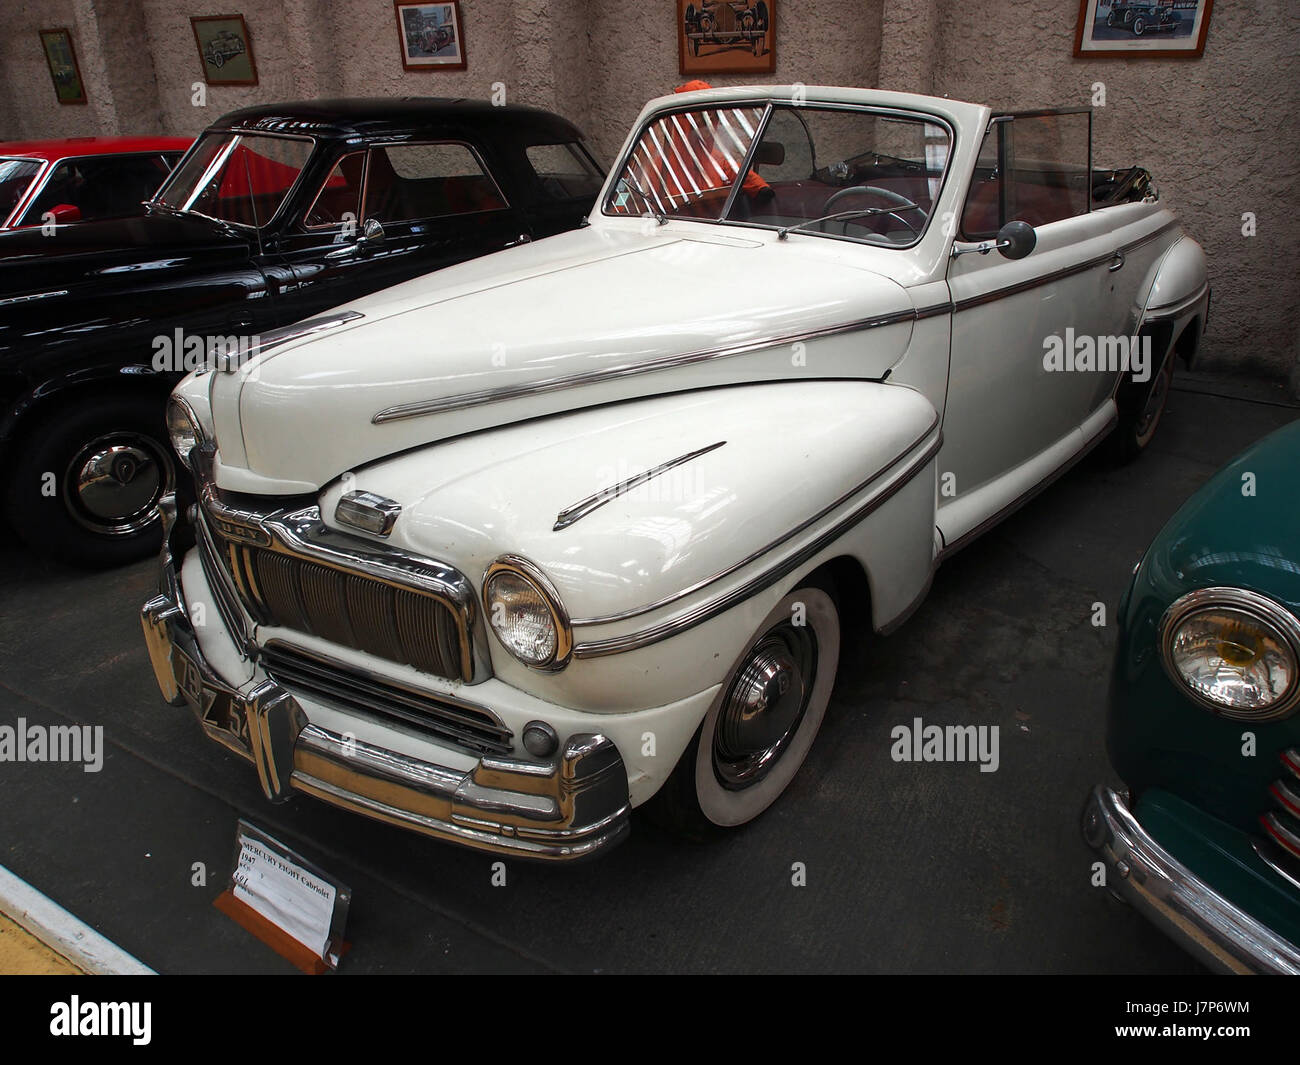 1947 Mercury Eight, 8 cylindres, 3,9 litre pic1 Banque D'Images